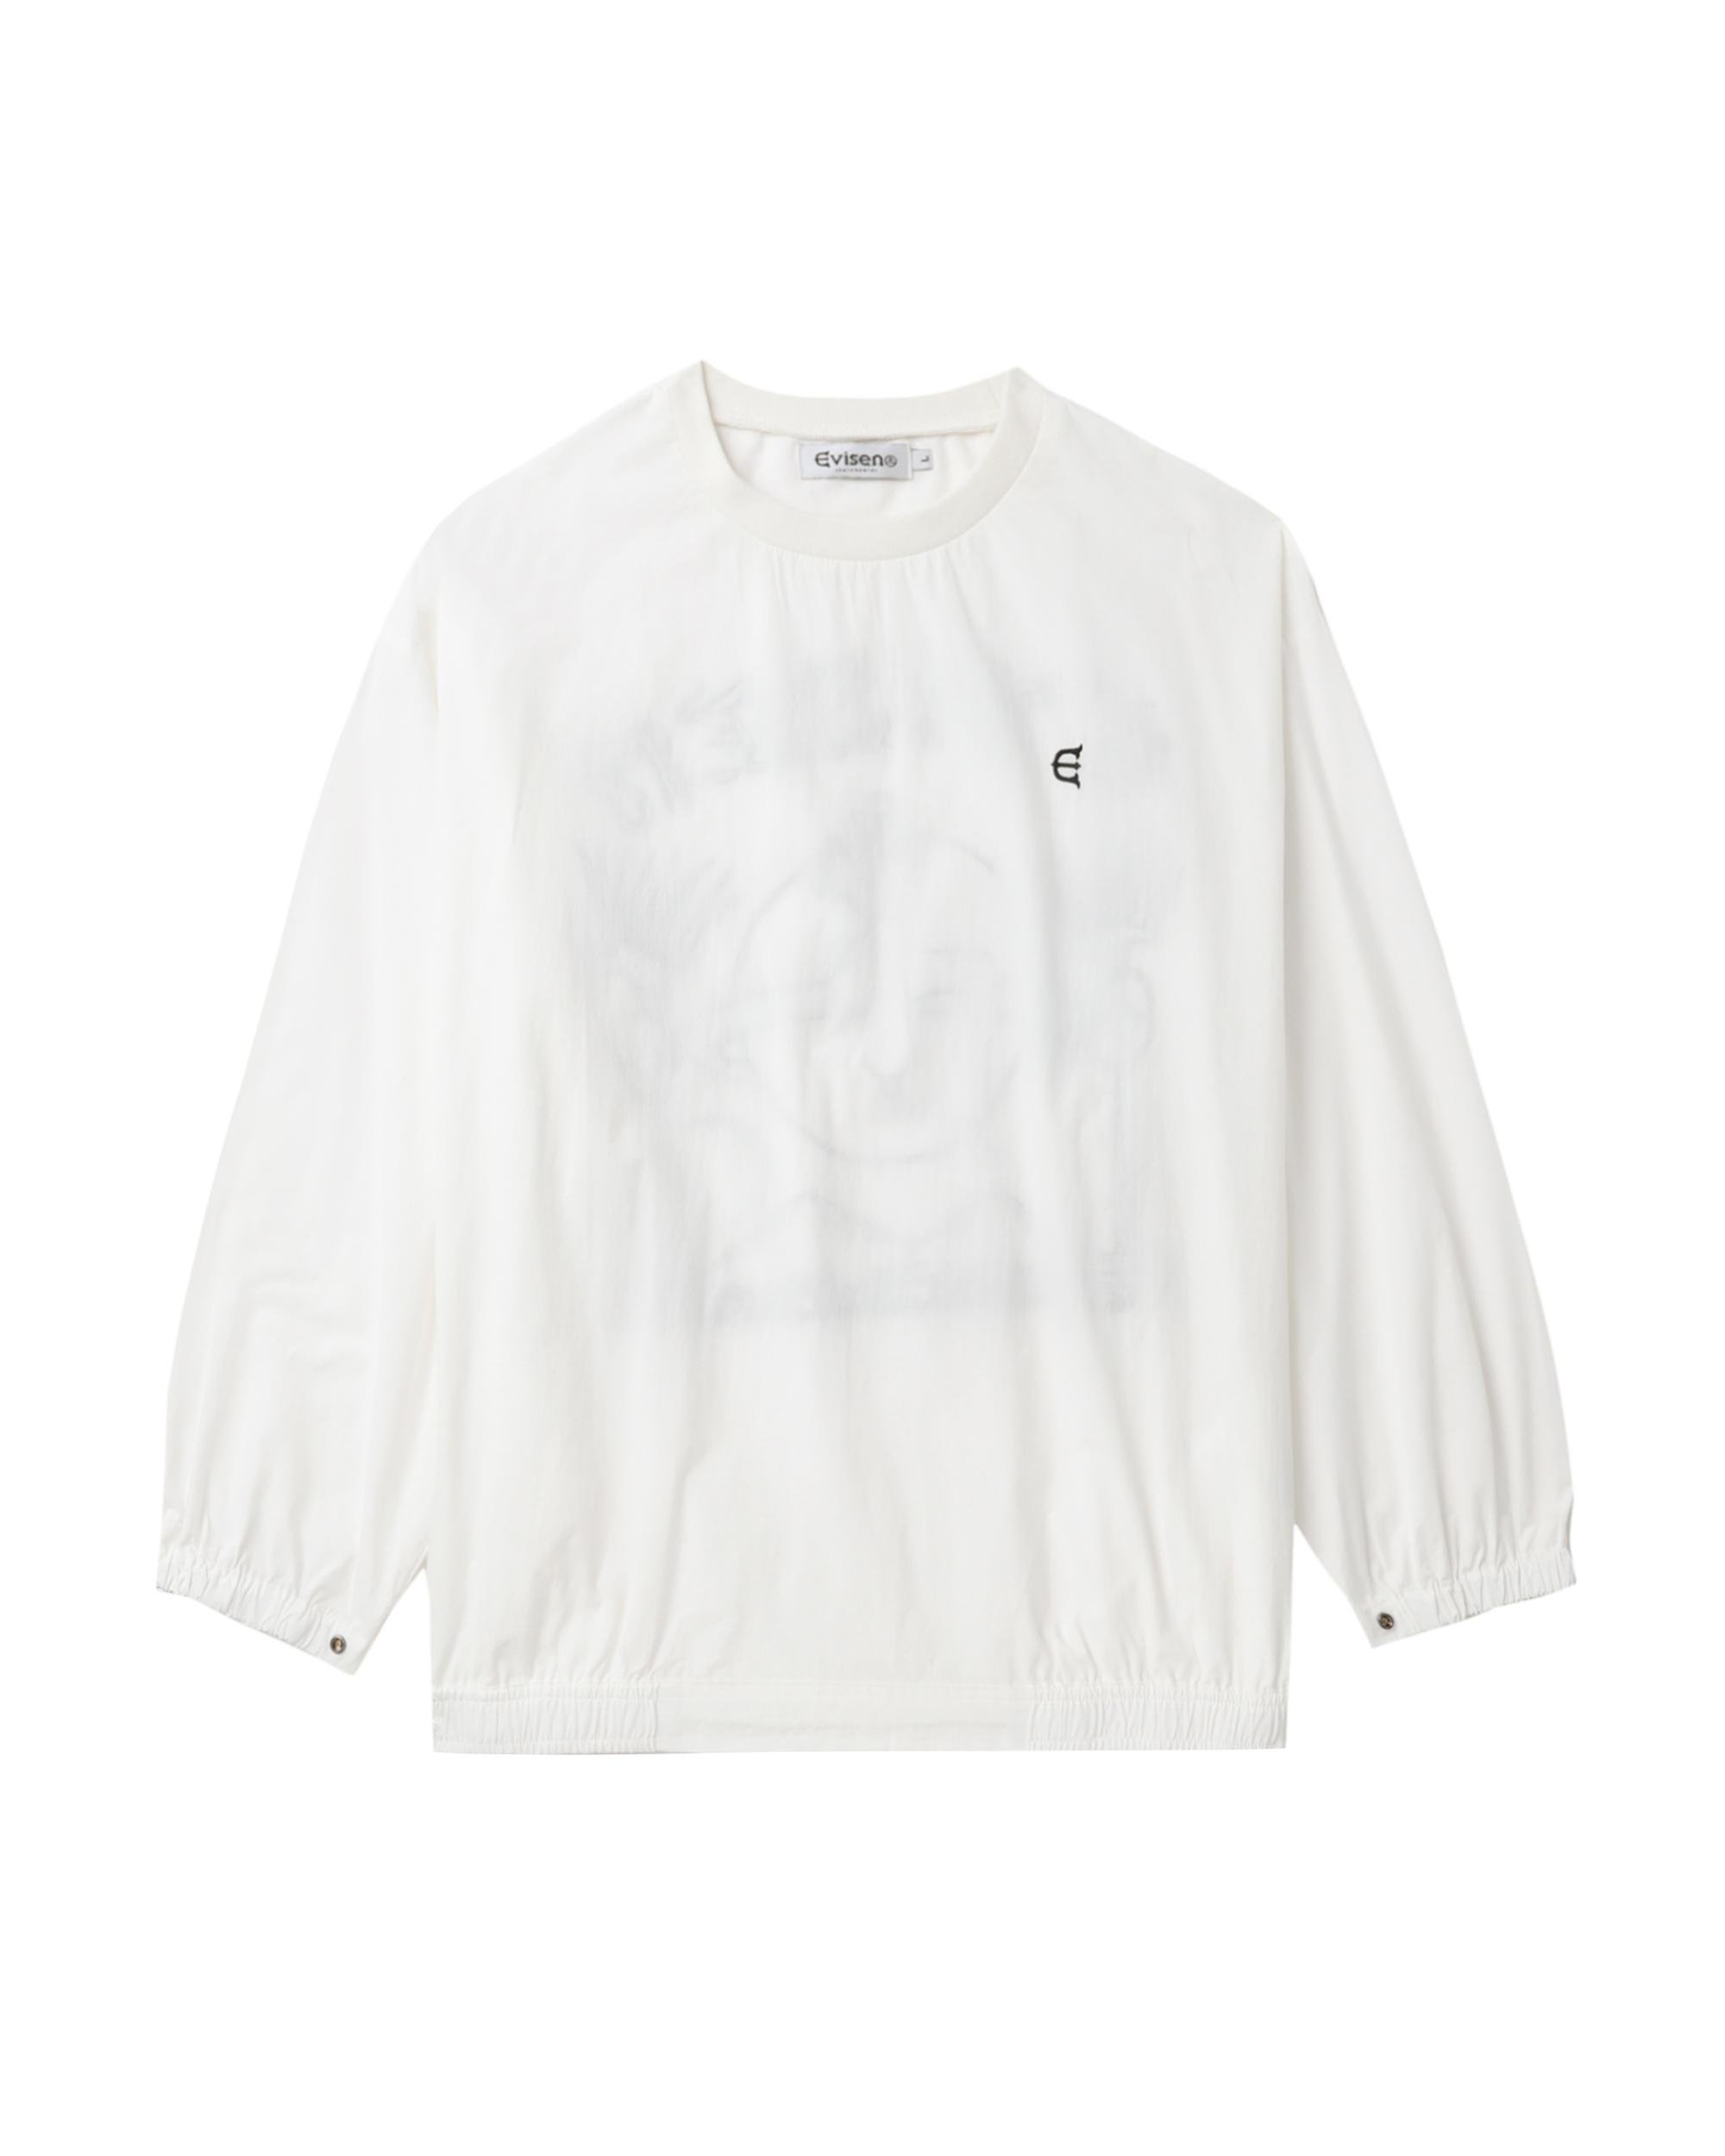 Embroidered long sleeves top by EVISEN SKATEBOARDS